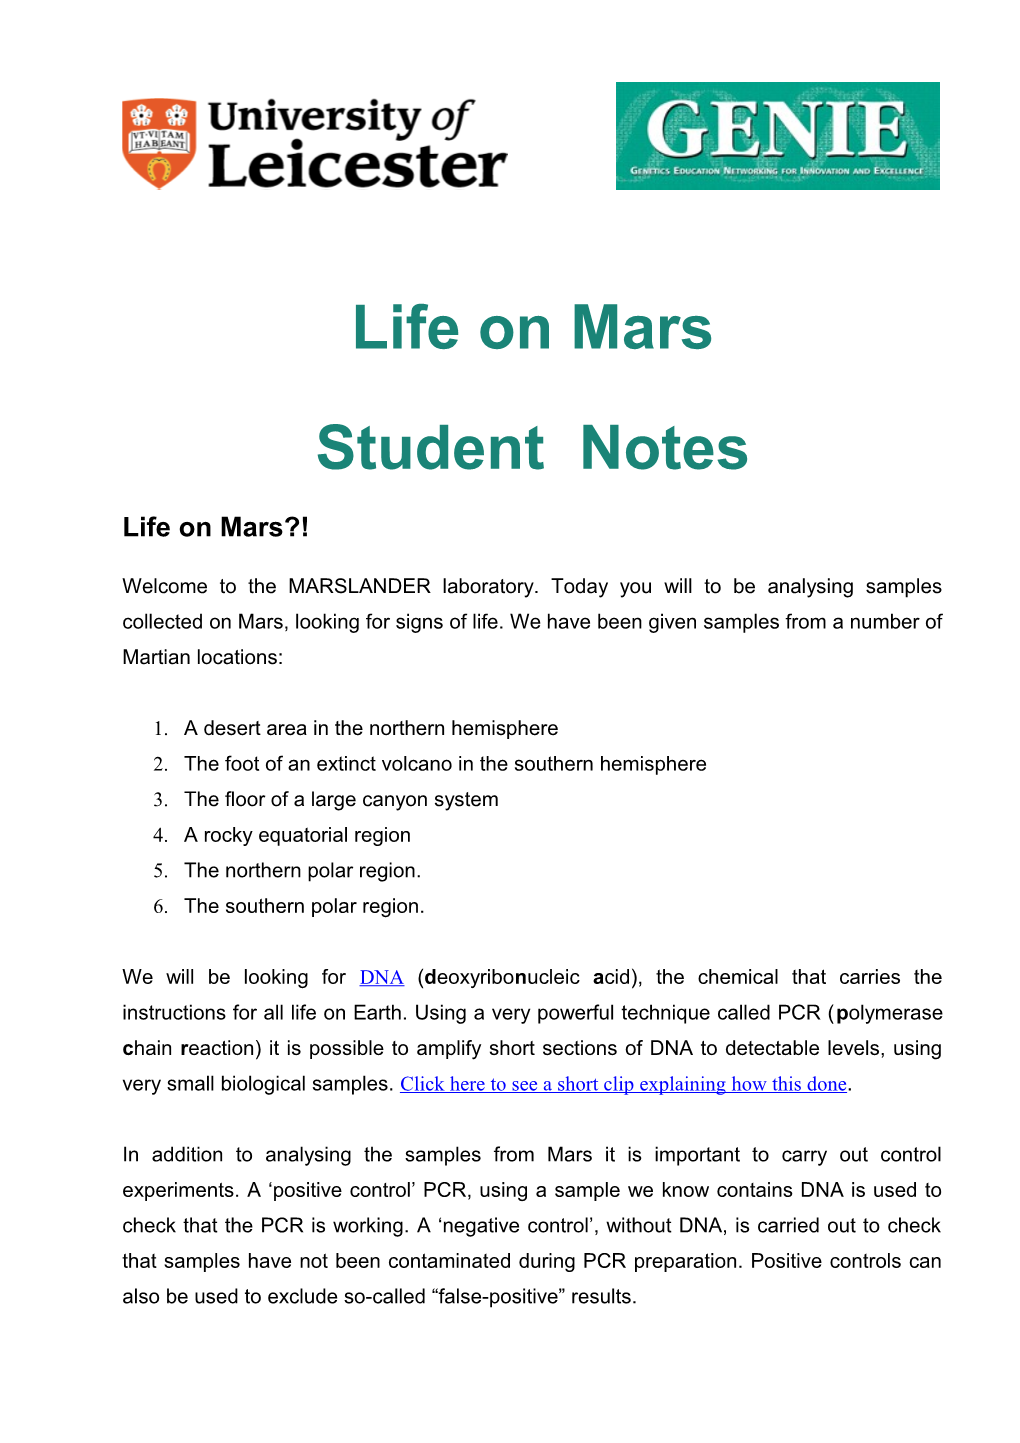 Student Notes